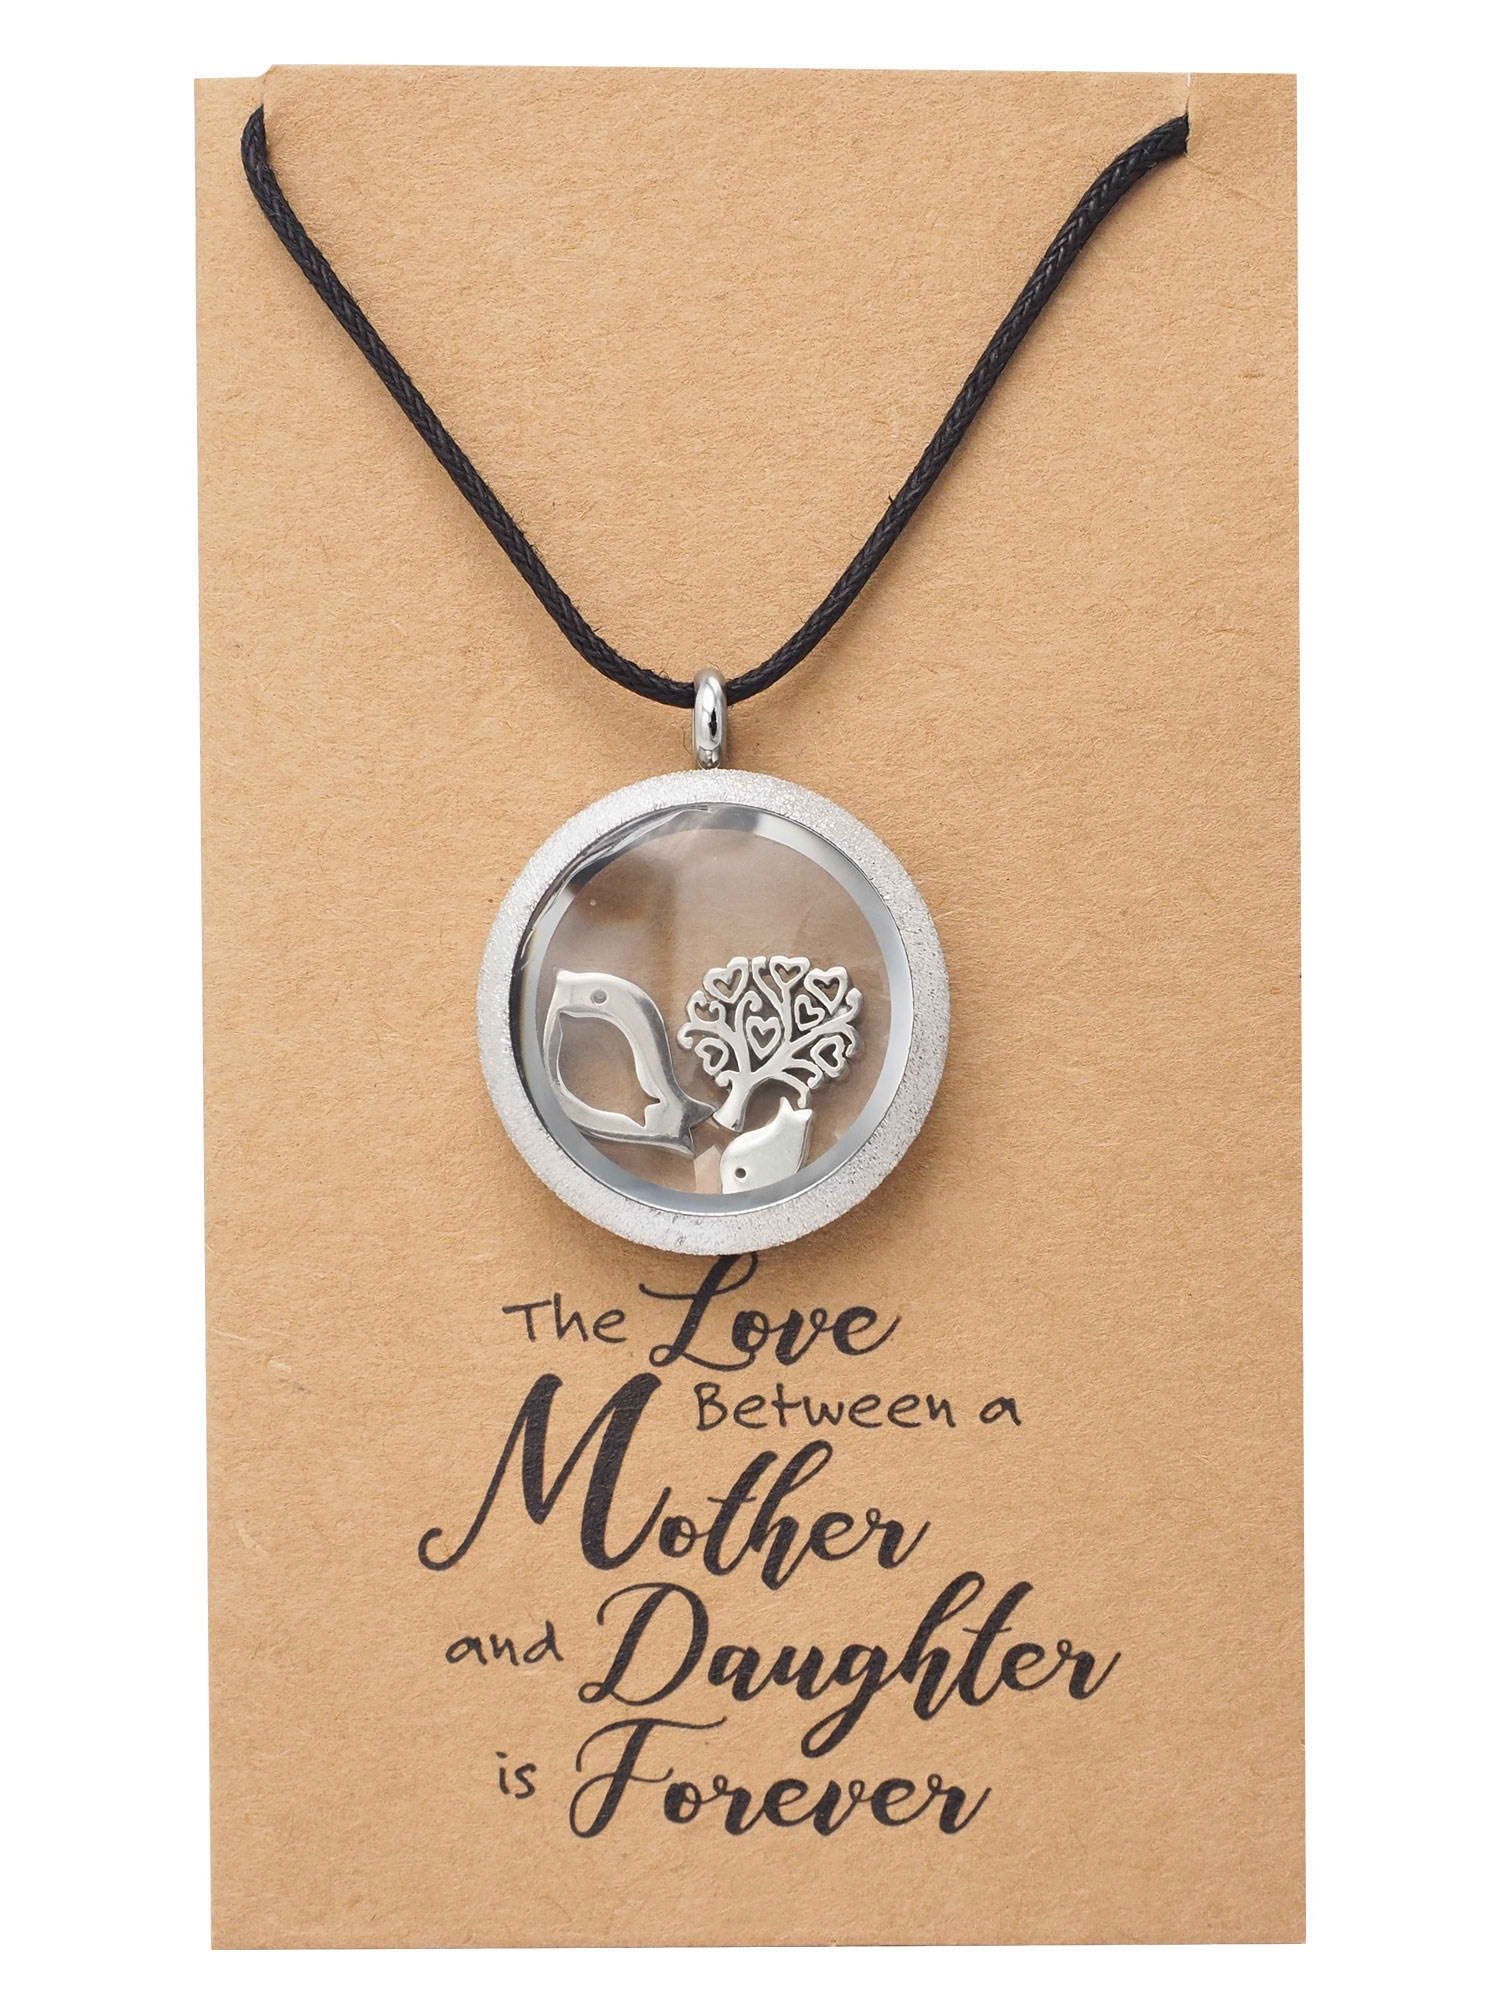 Divinely Protected Locket Necklace by Loft & Daughter – Lore